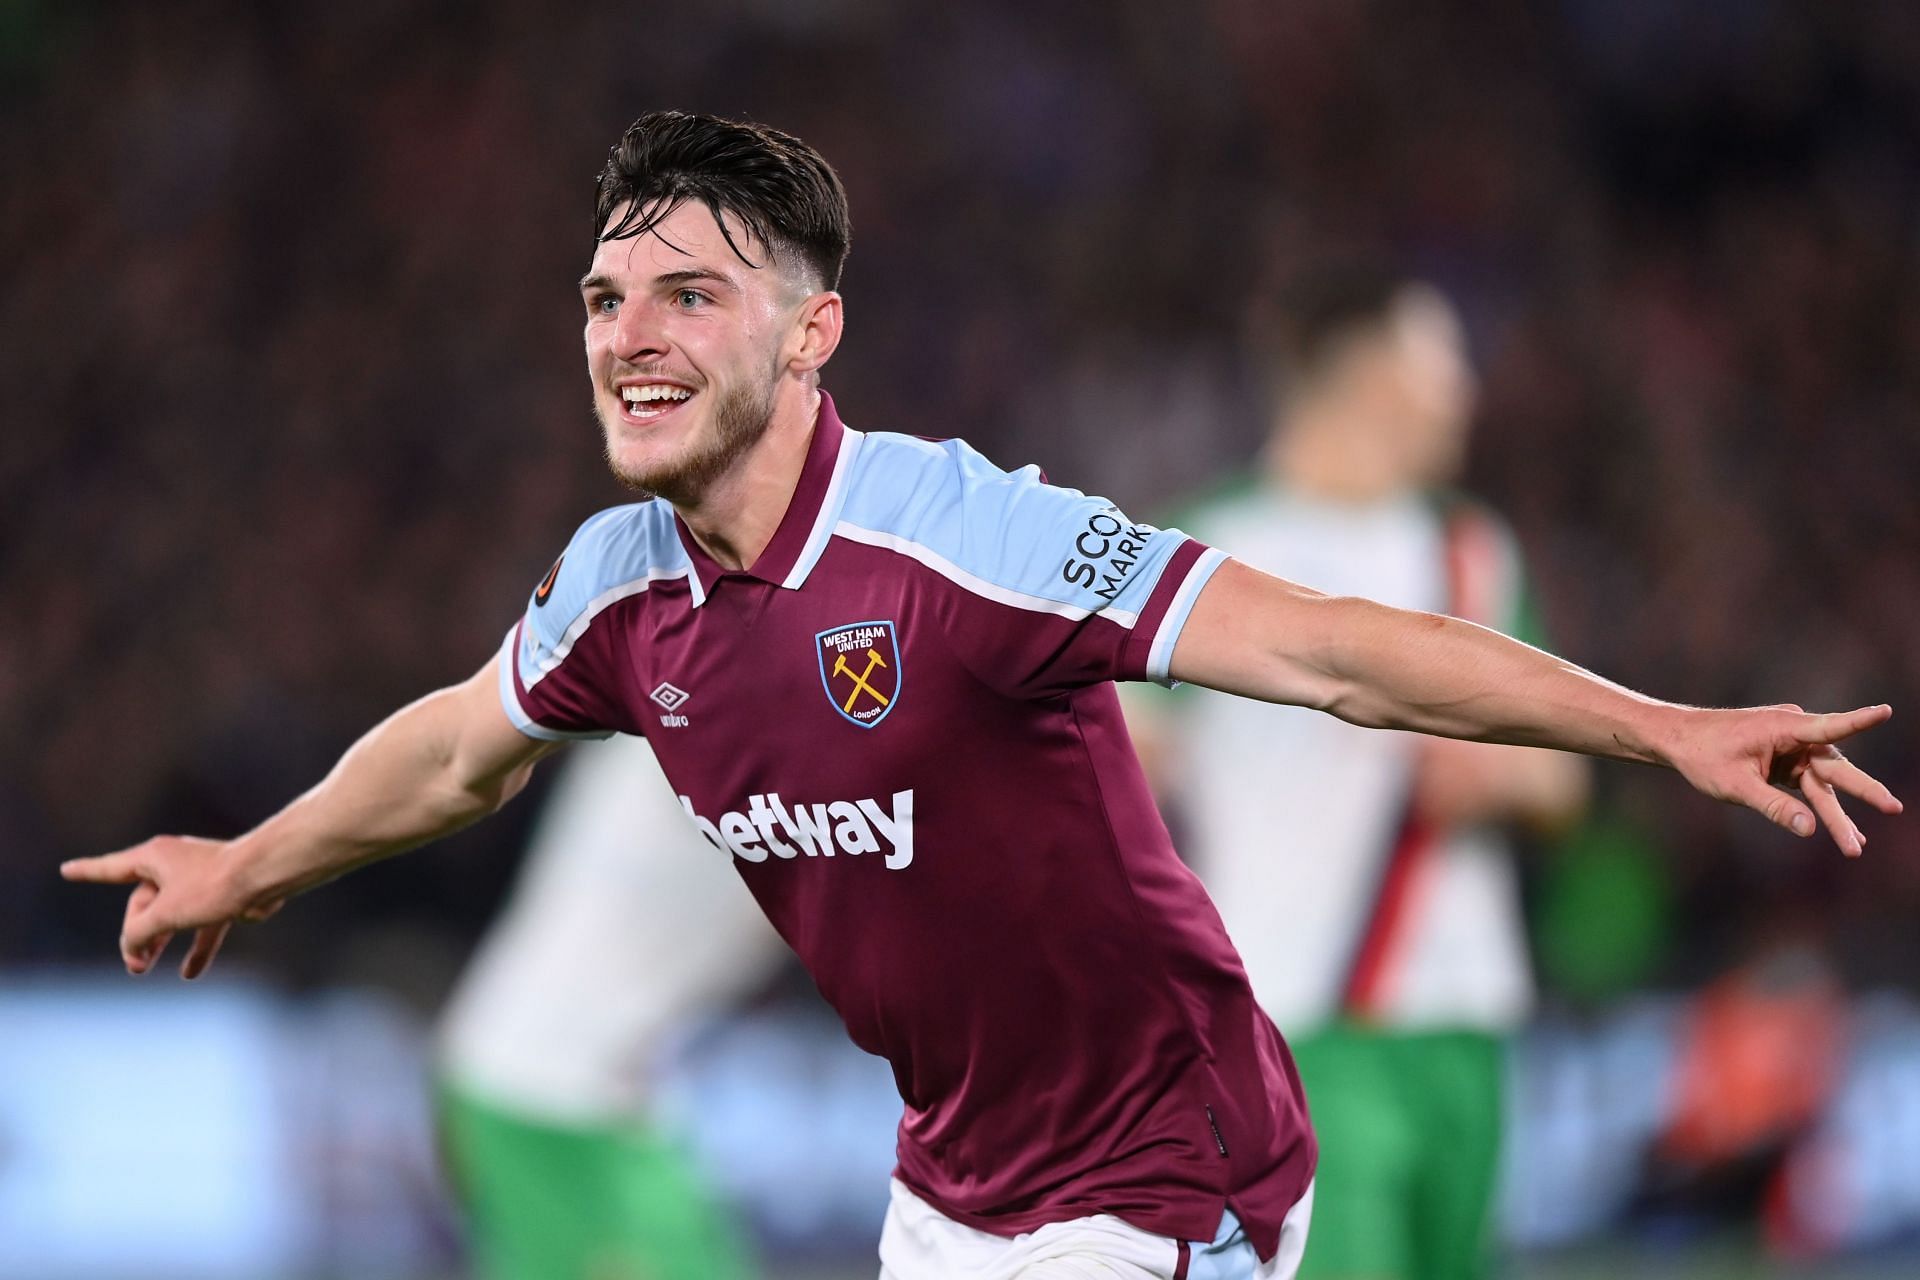 Declan Rice first captained West Ham at the age of 20